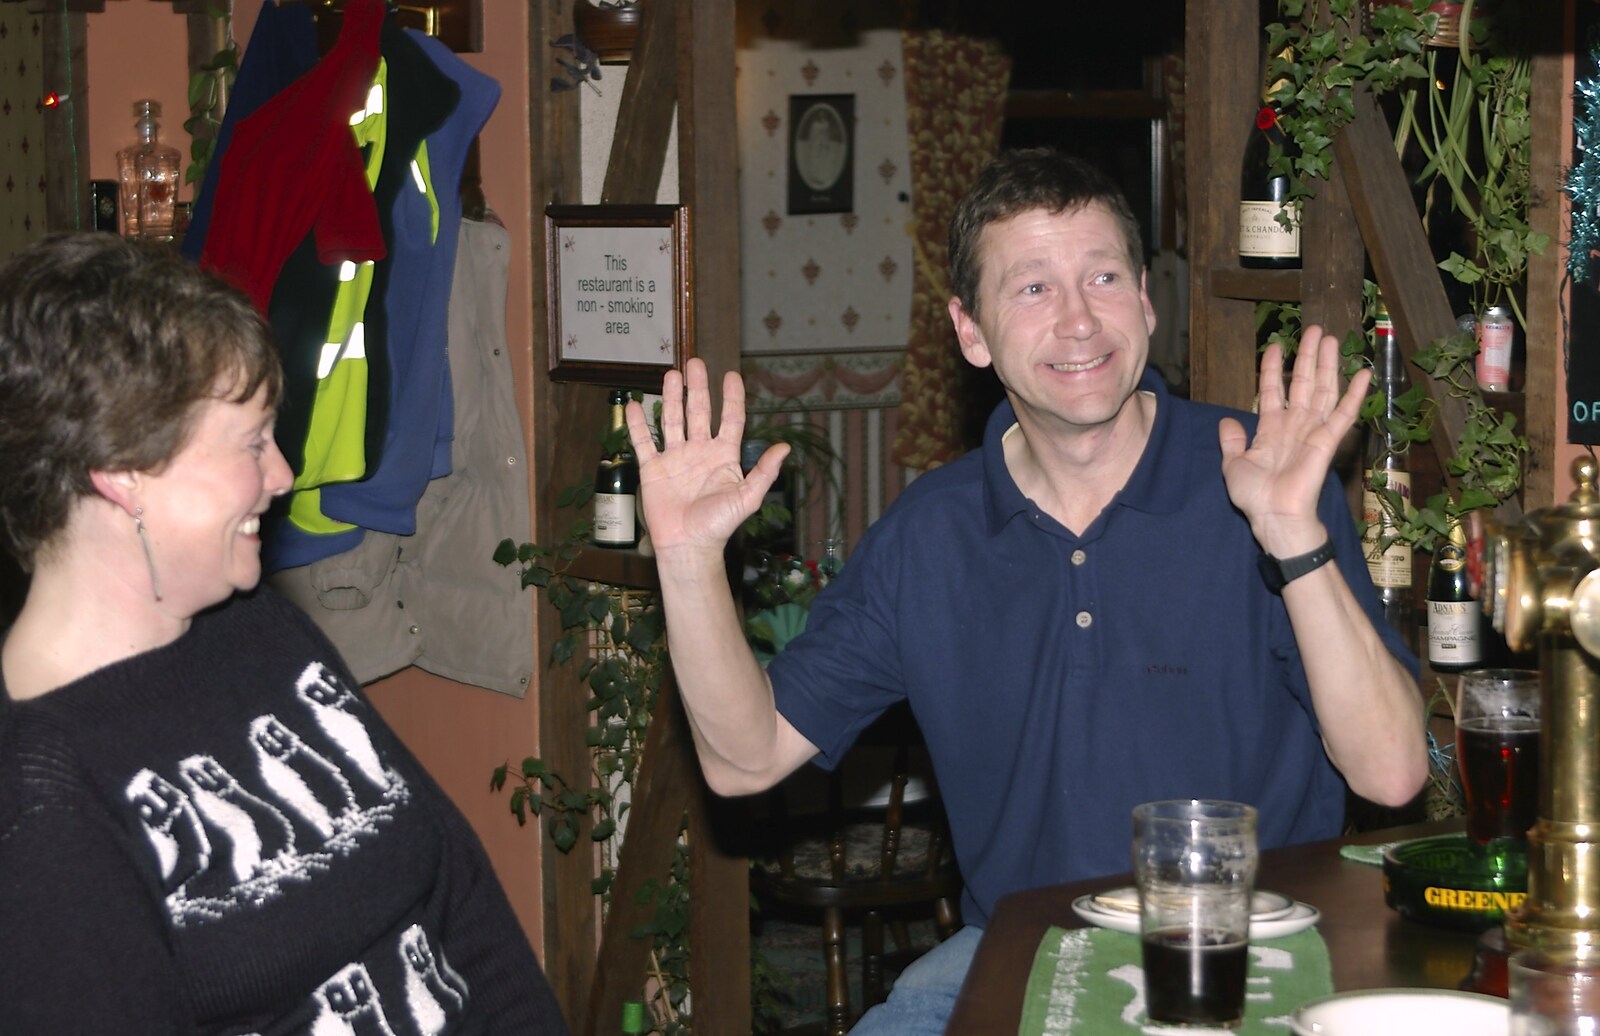 New Year's Eve at The Swan Inn, Brome, Suffolk - 31st December 2004: Apple sticks his hands up